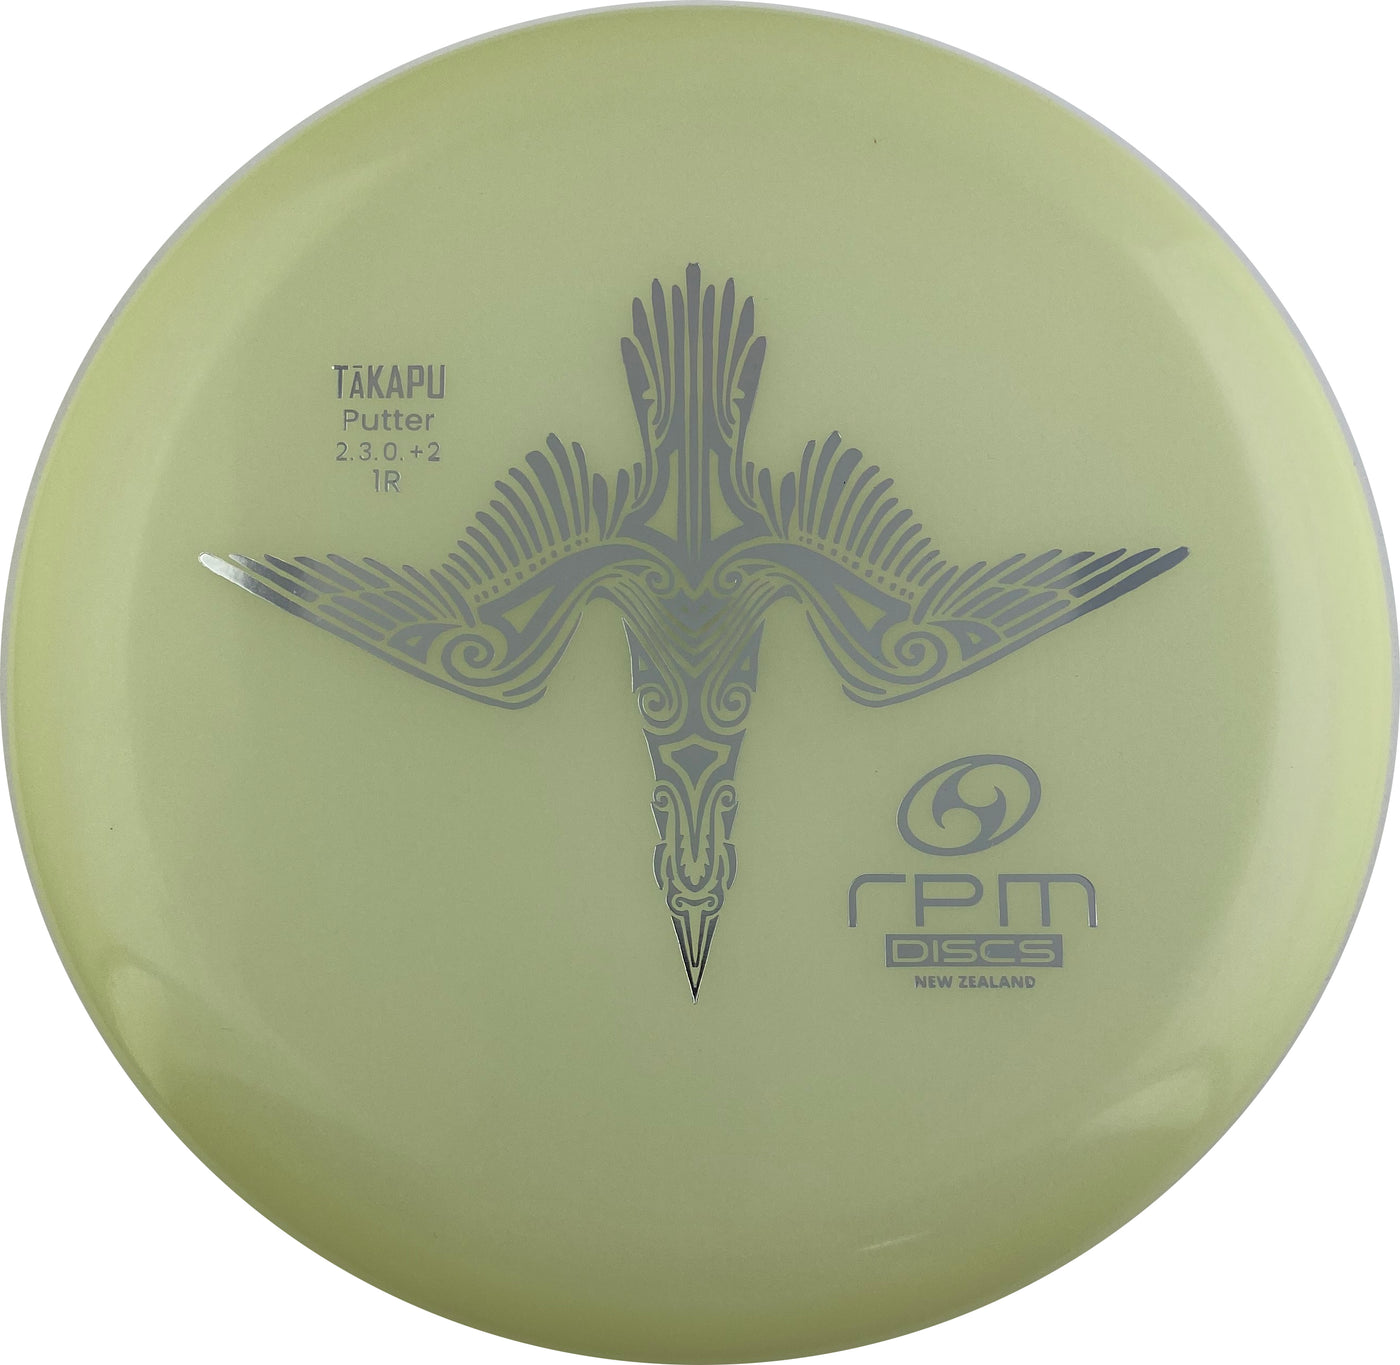 RPM Discs Cosmic Takapu Putter with 1R - First Run Stamp - Speed 2